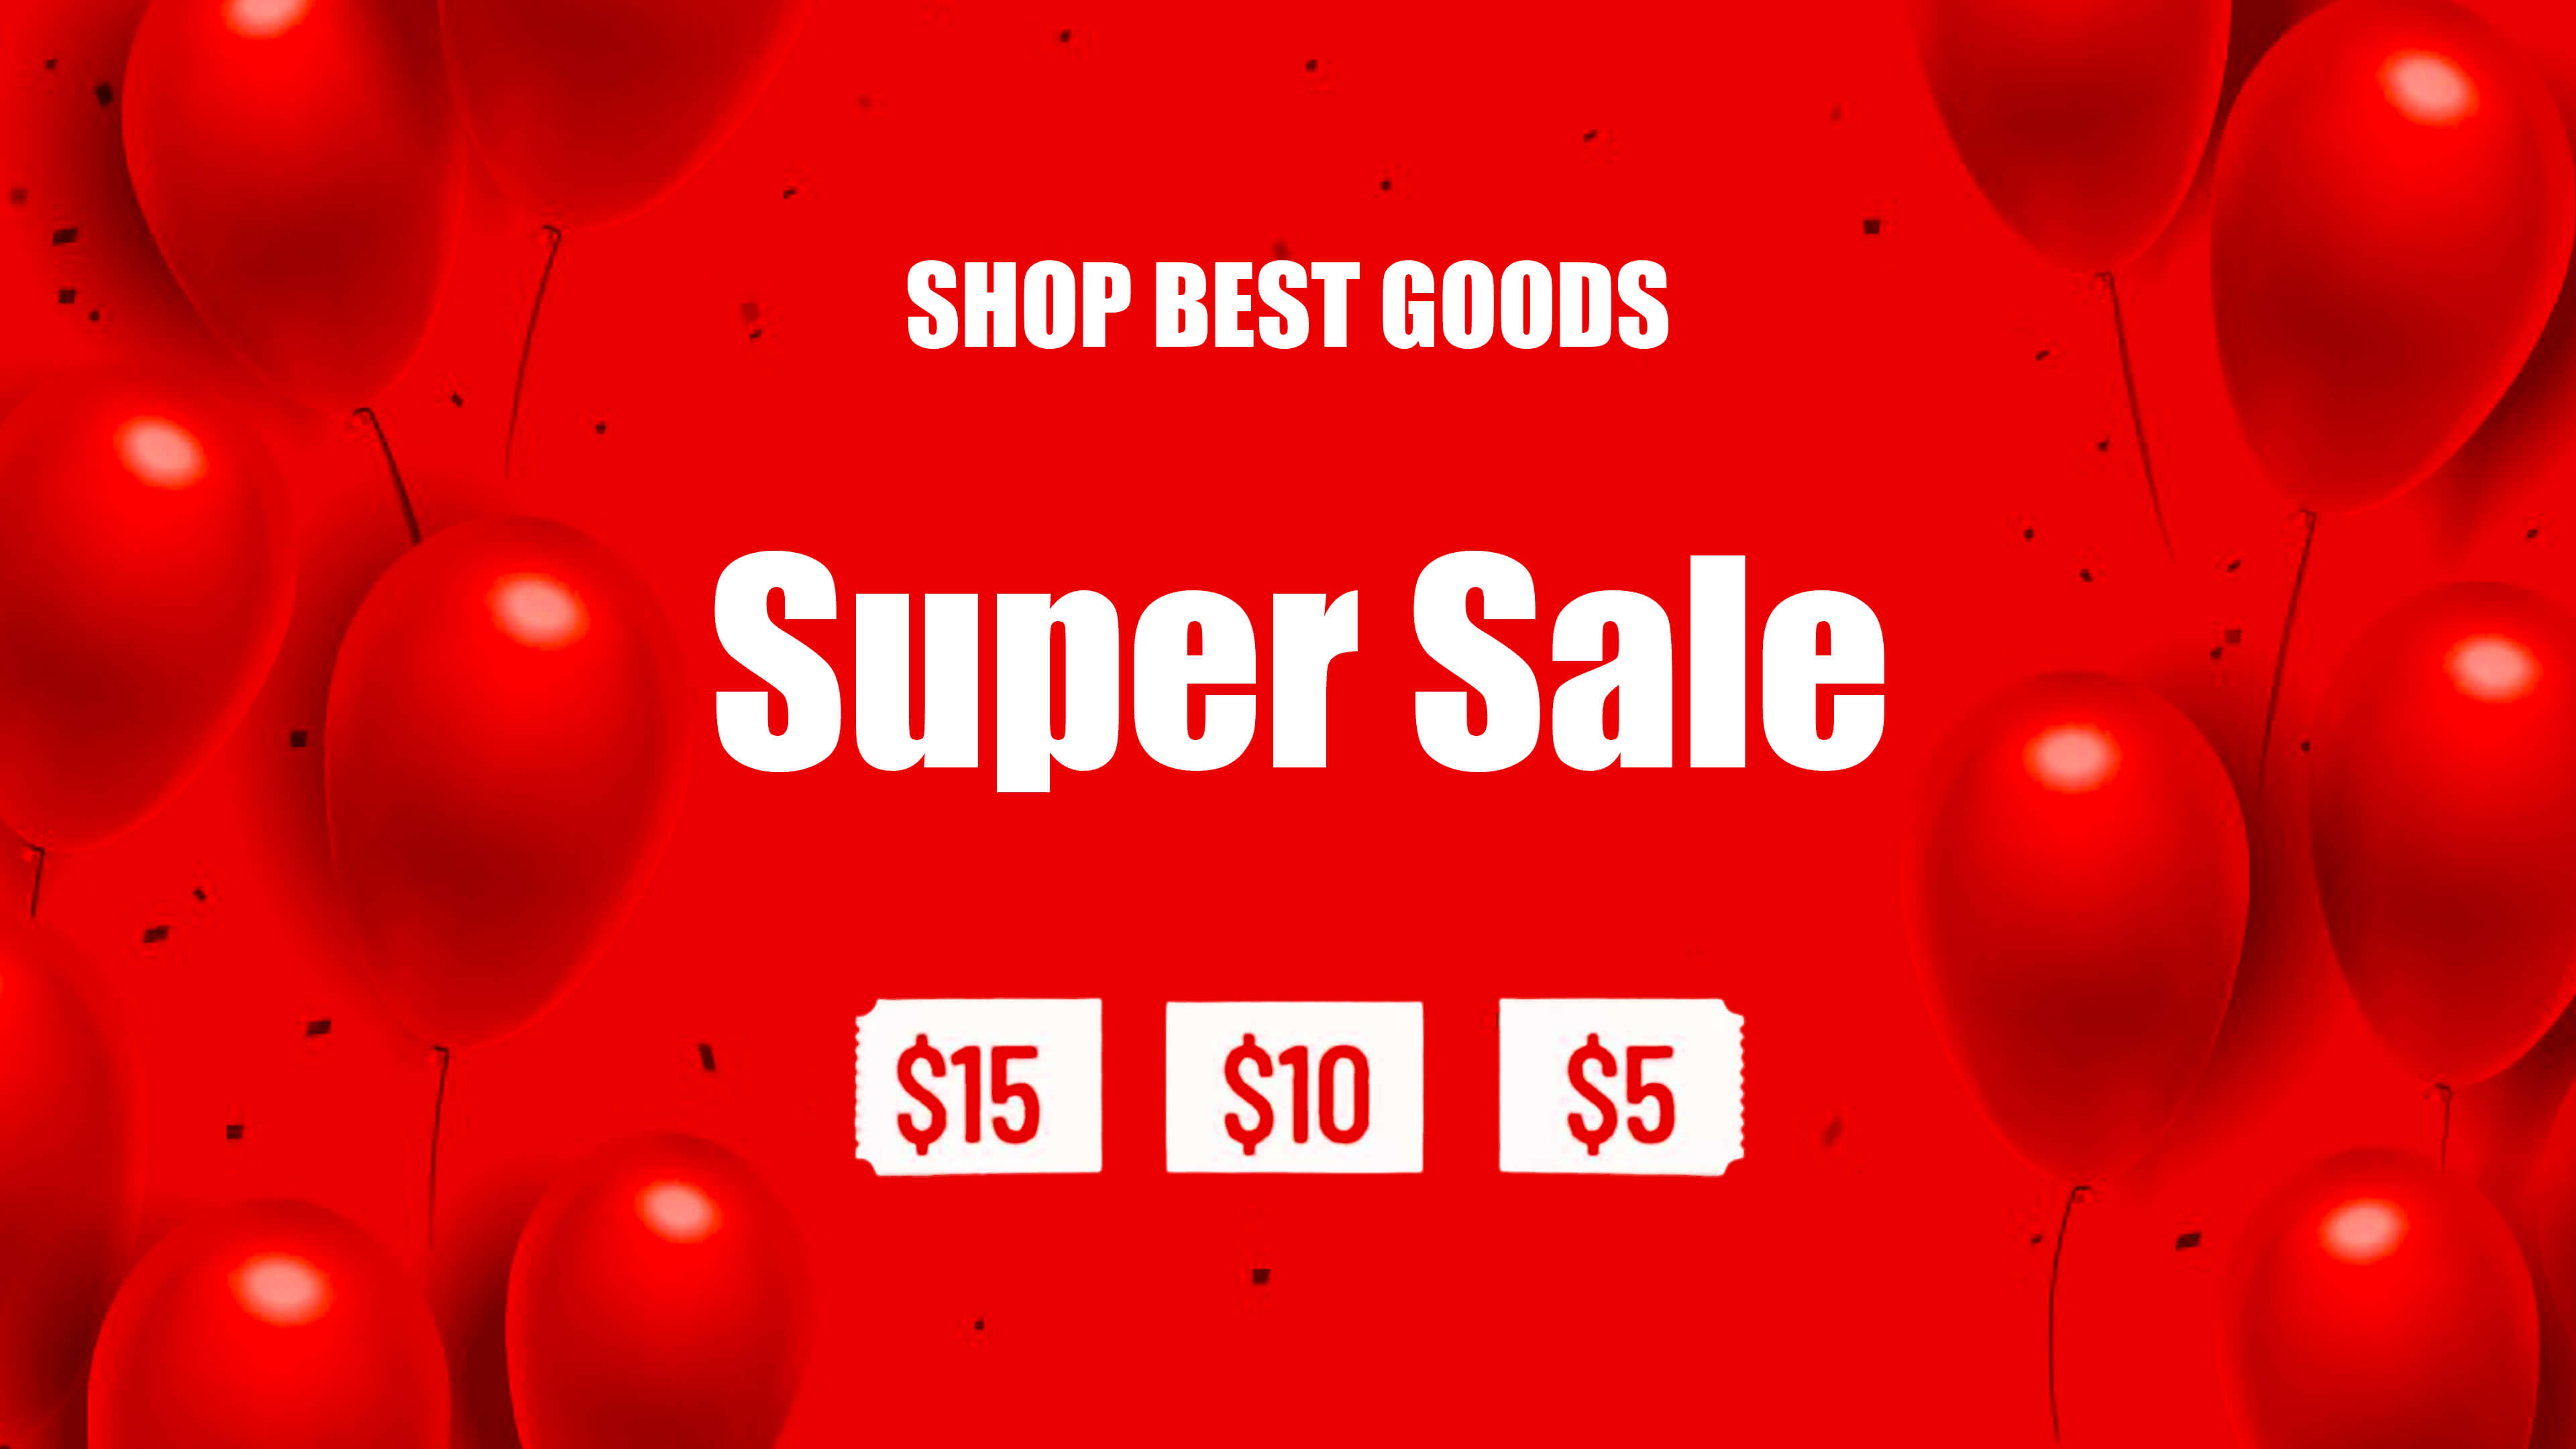 Shop Best Goods is an online marketplace that features a broad range of best and cheap productsPicture